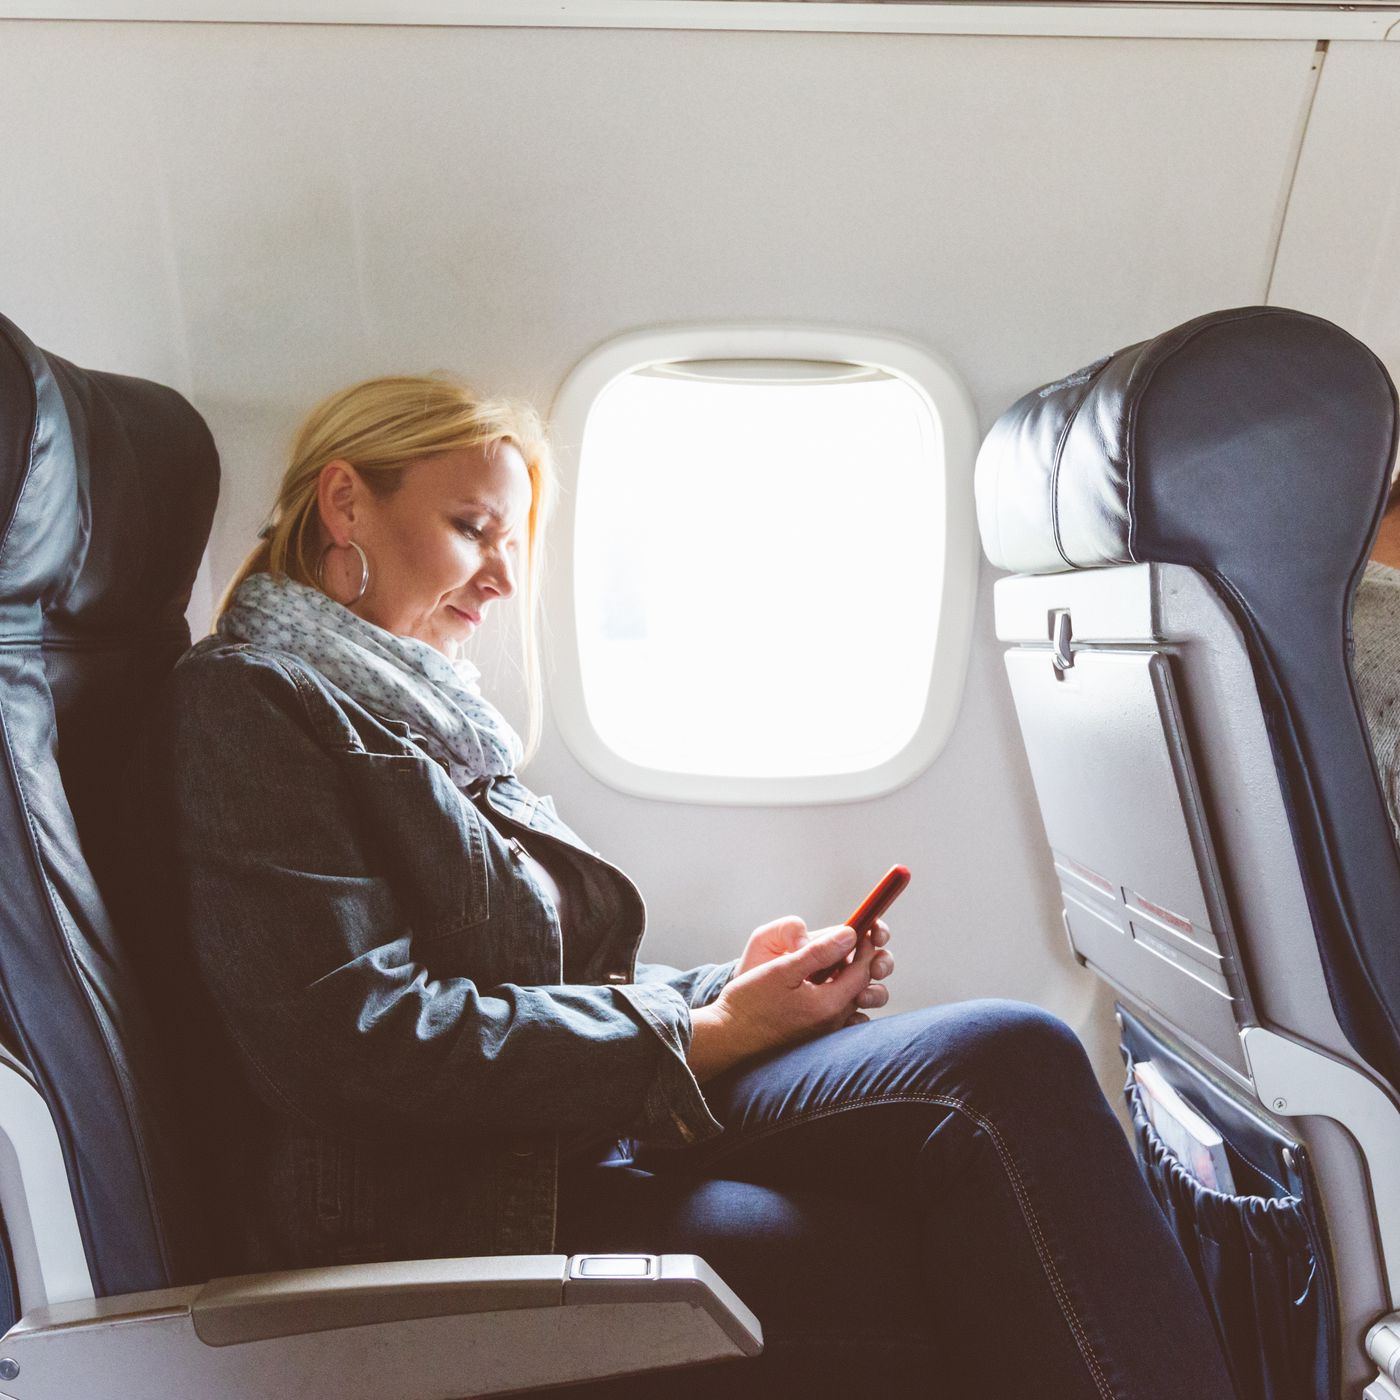 Should You Recline On An Airplane The Perennial Seat Debate